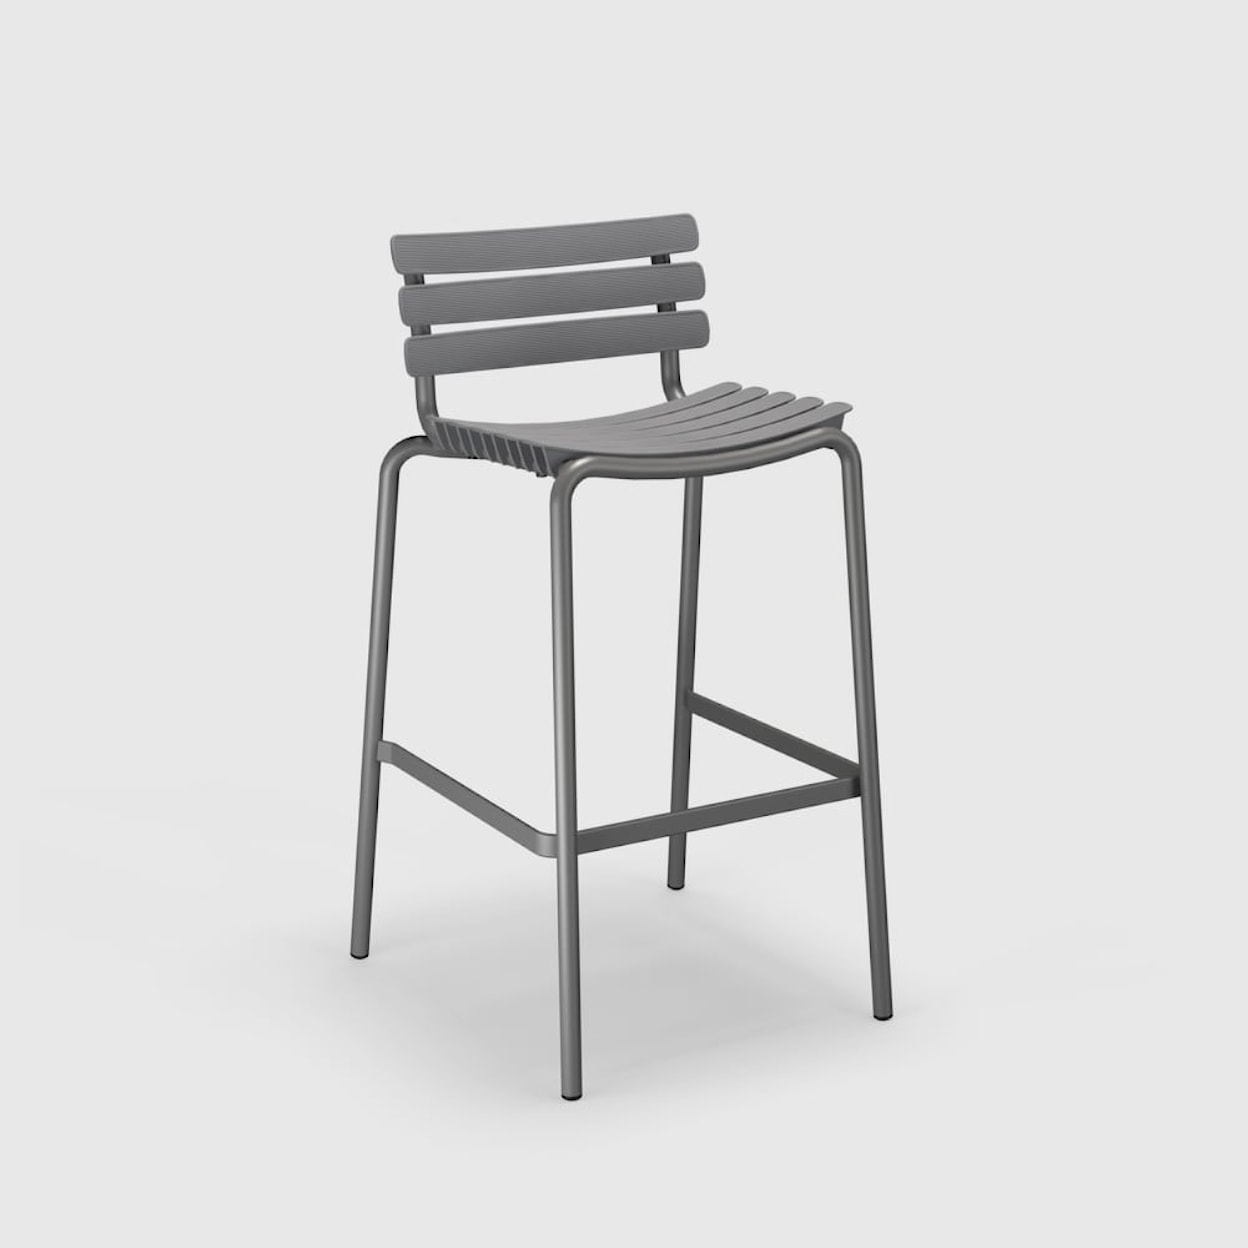 HOUE Outdoor Chairs and Bar Stools Recplis Grey Outdoor Bar Stool